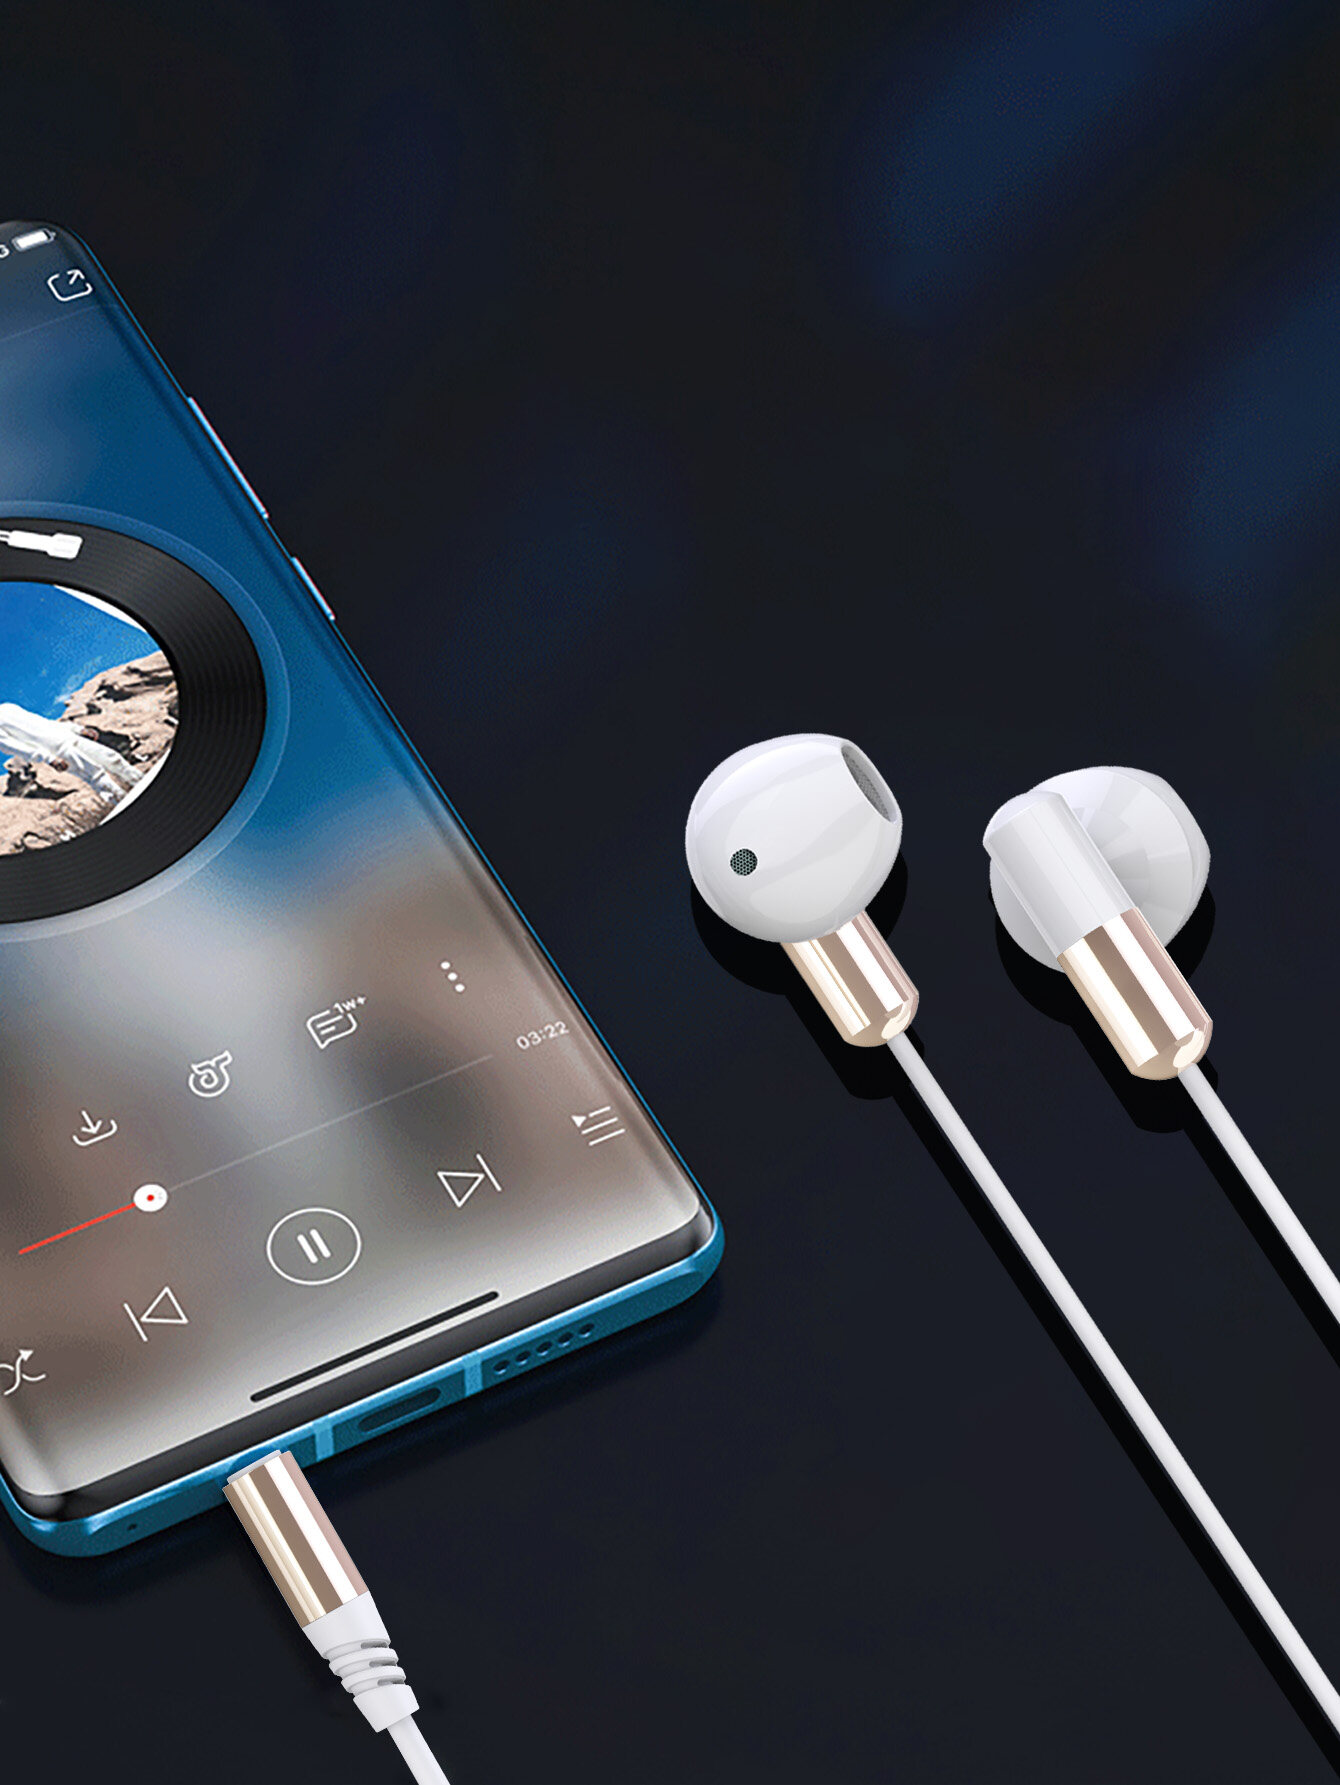 BYZ; Happyaudio; wired earbuds with mic; wired earphone manufacturers; oem earphones; Wholesale Earphones;china electronic manufacturing services; china earphone factory